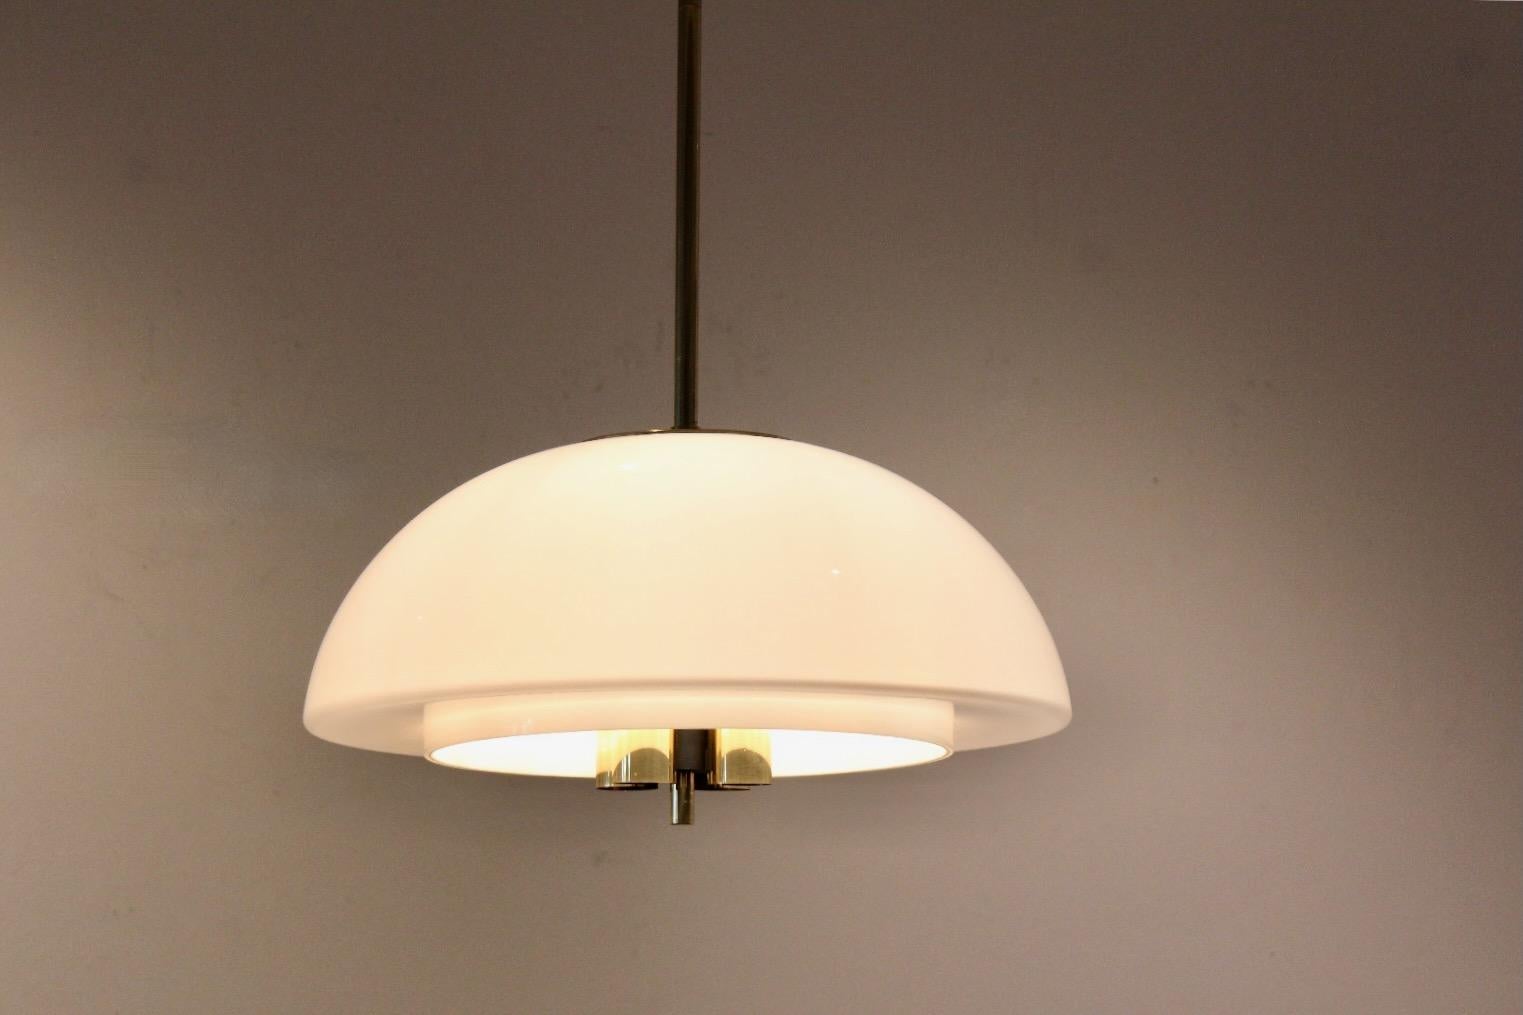 Large Opal glass (hand-made) pendant light, manufactured by Glashütte Limburg, Germany, 1970s. The lamp is made of polished brass with a mouth-blown opaline glass lamp shade that provides a smooth and wonderful large area light. The lamps is in very